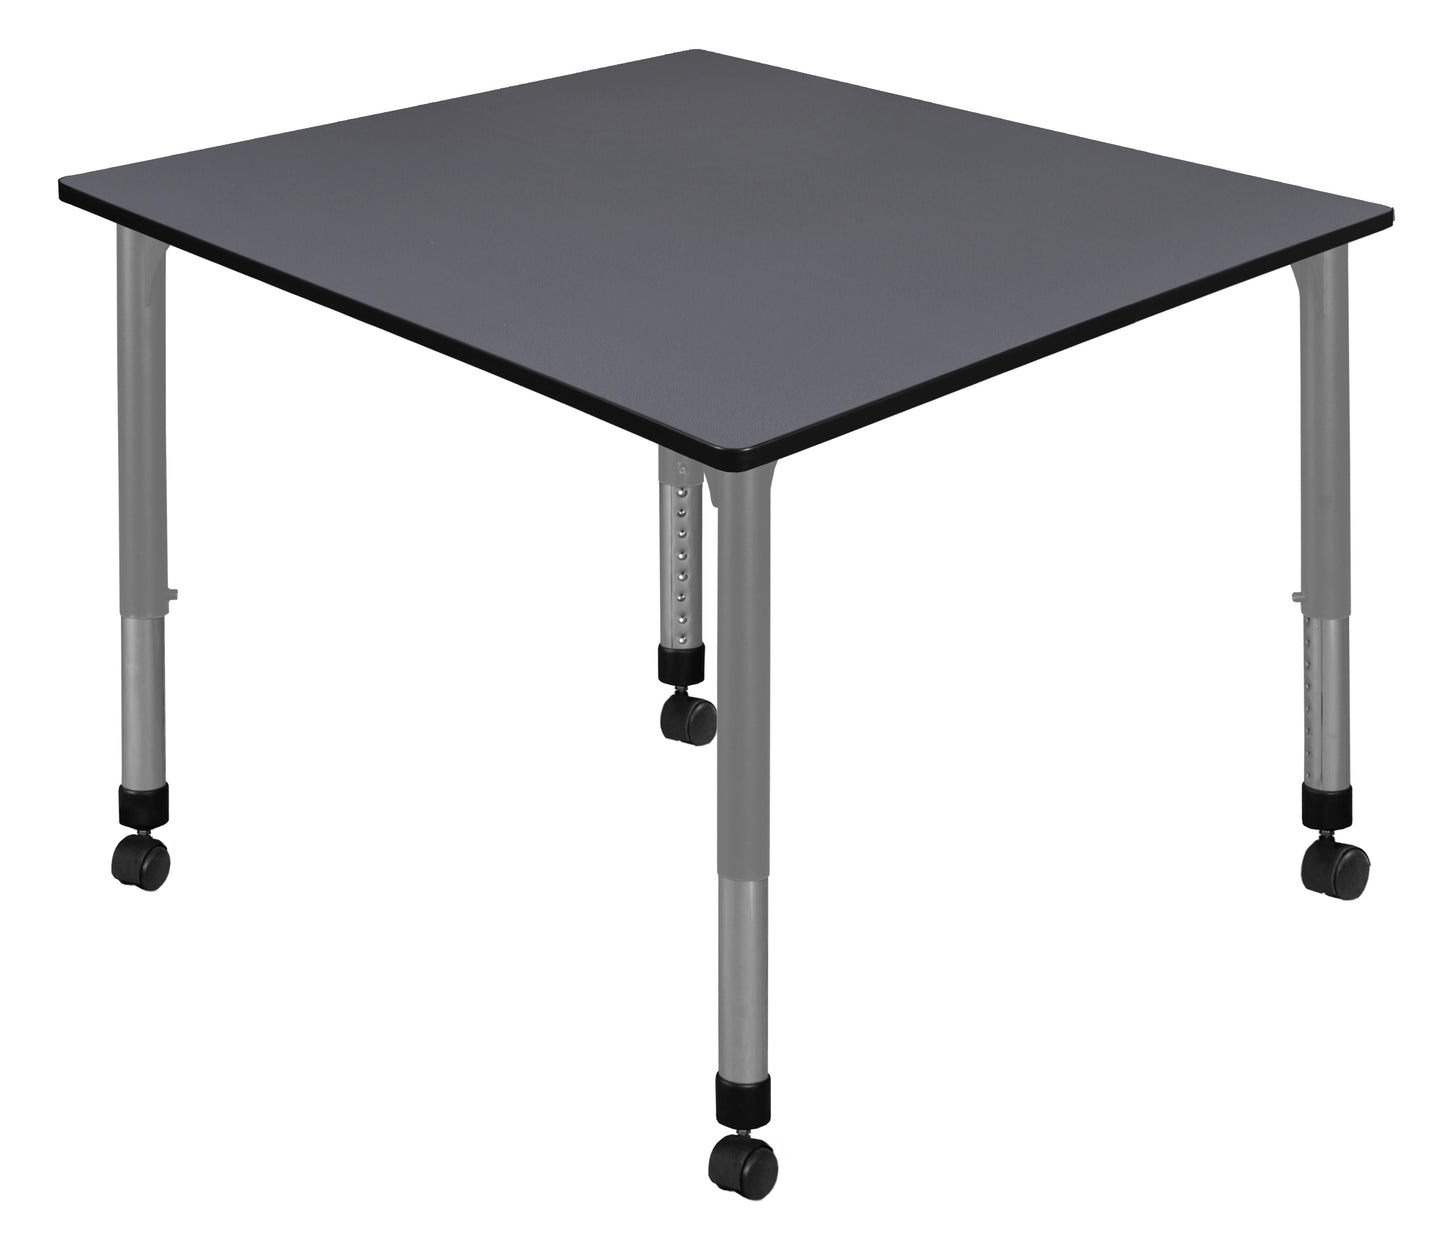 Regency Kee 42 in. Square Height Adjustable Mobile Classroom Activity Table